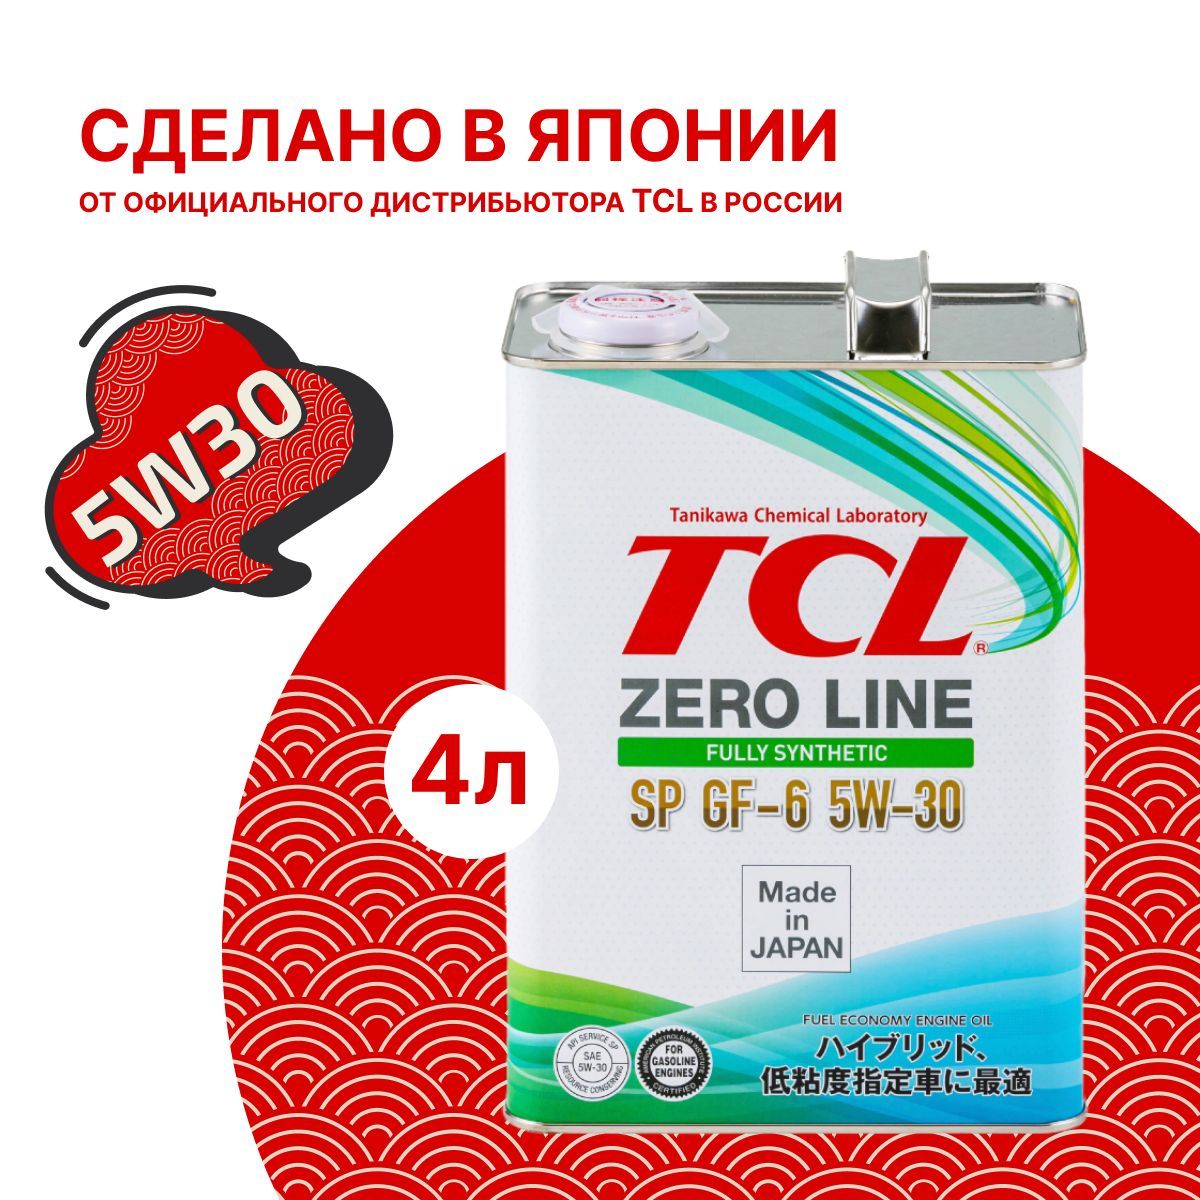 TCL масло моторное 5w-30. Моторное масло ТСЛ 5в30. Моторное масло tcl 5w30